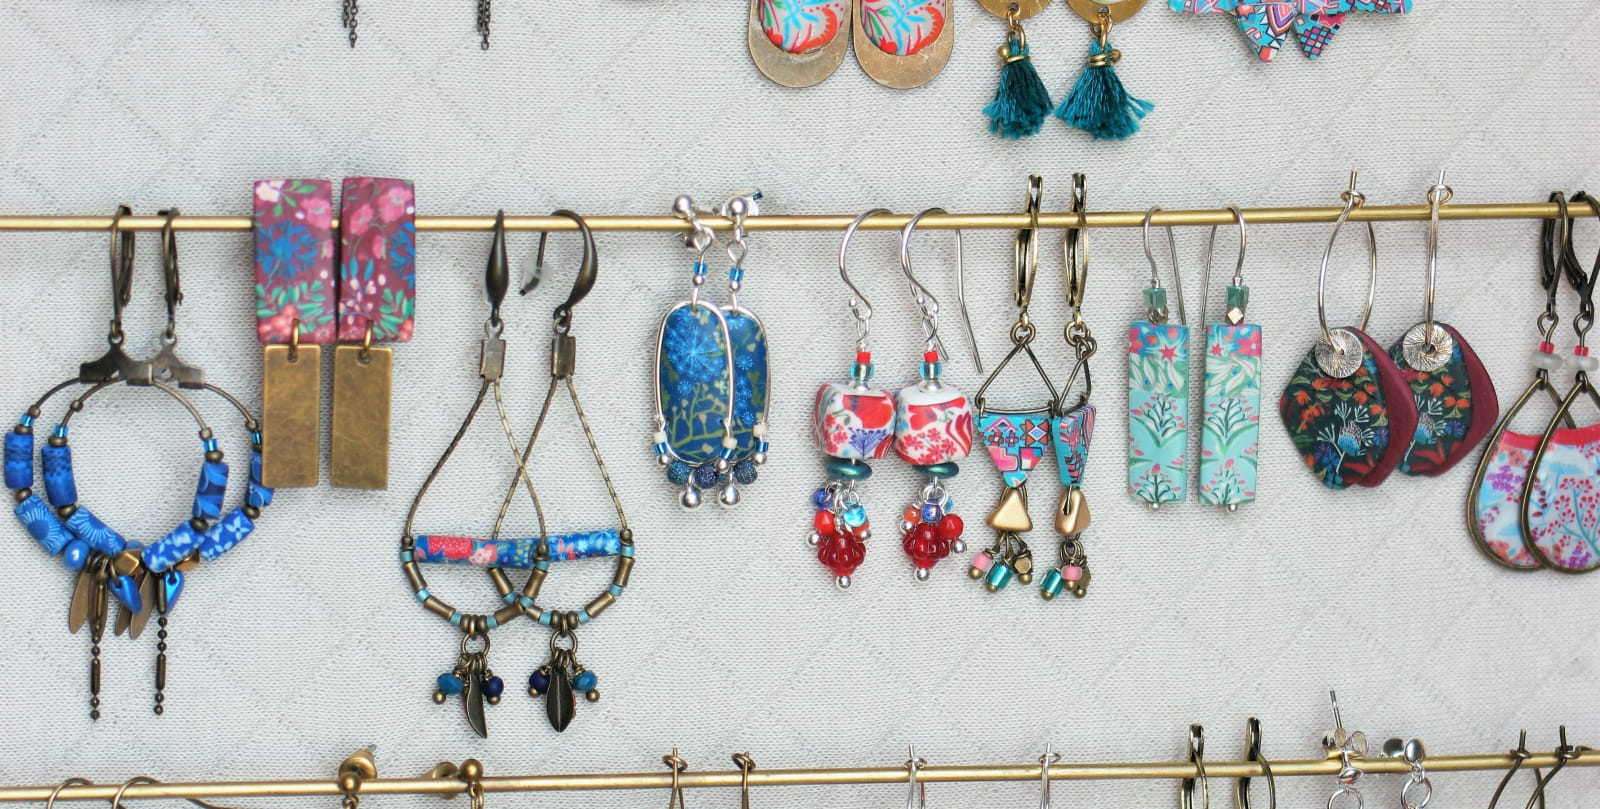 Colorful jewelry with original patterns